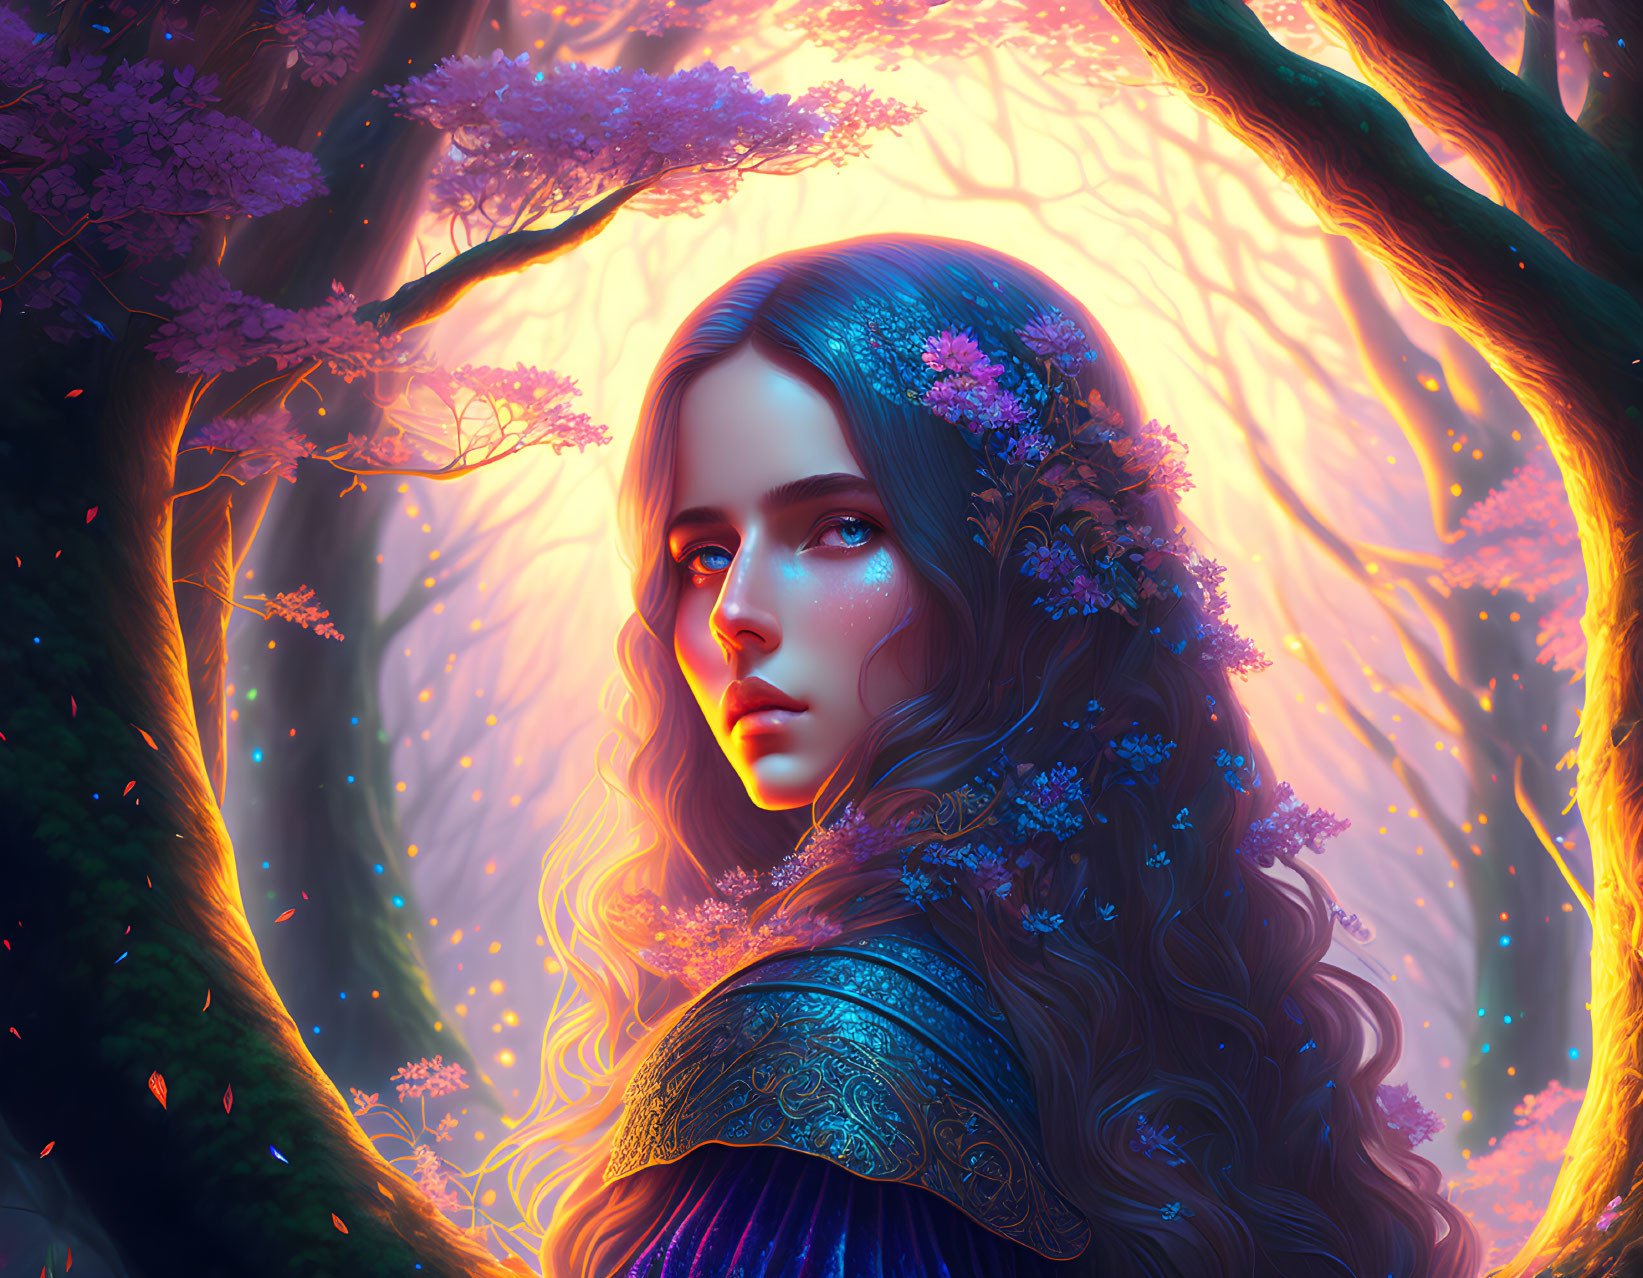 Enchanted portrait of a woman in twilight with cherry blossom trees